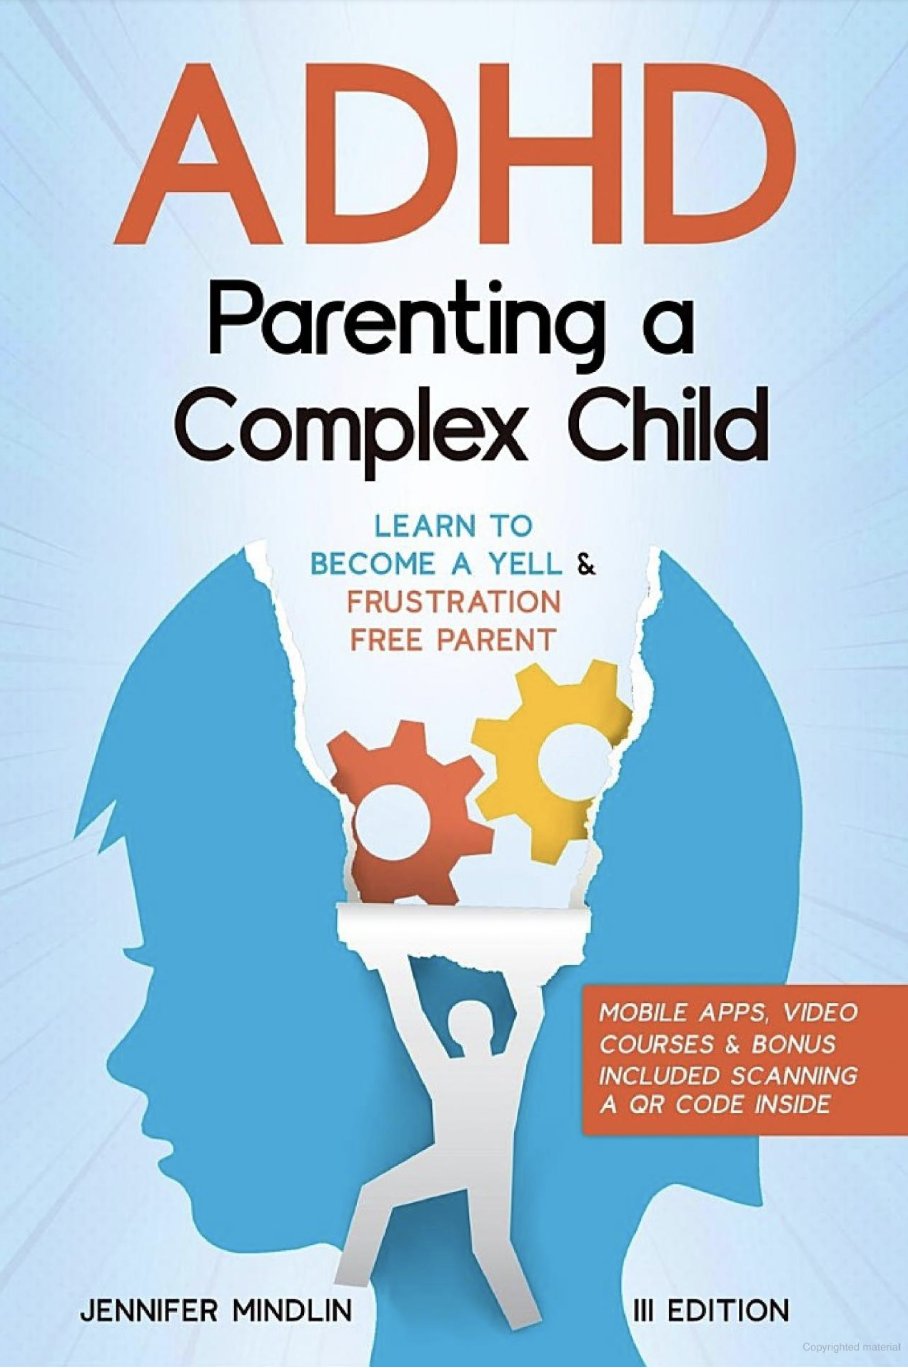 cover "adhd parenting a complex child"